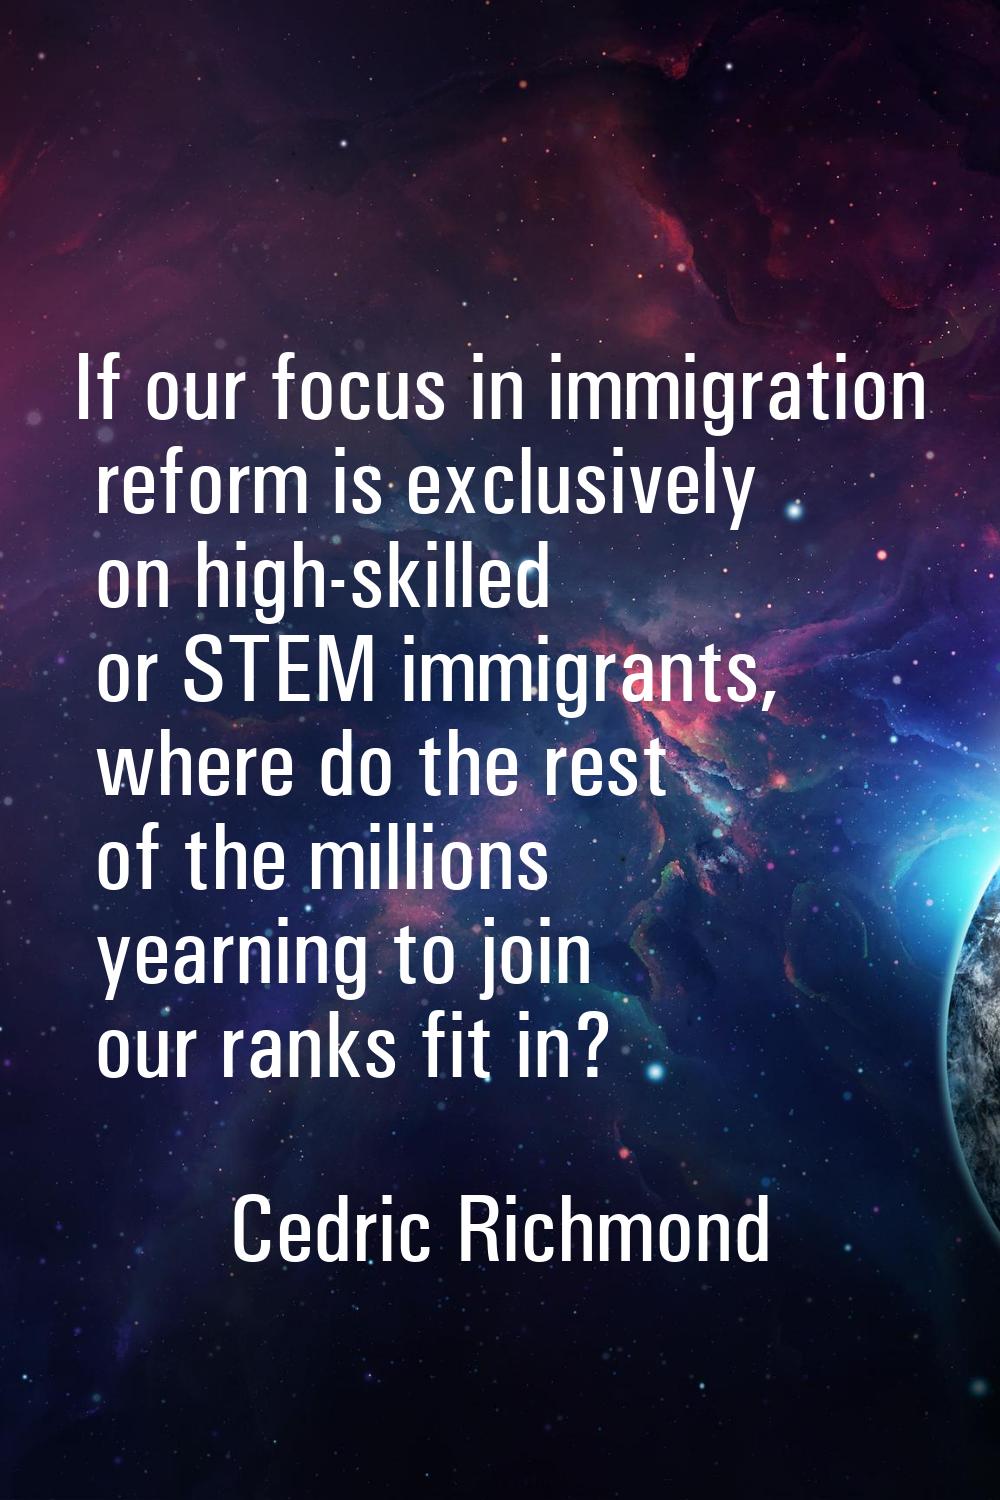 If our focus in immigration reform is exclusively on high-skilled or STEM immigrants, where do the 